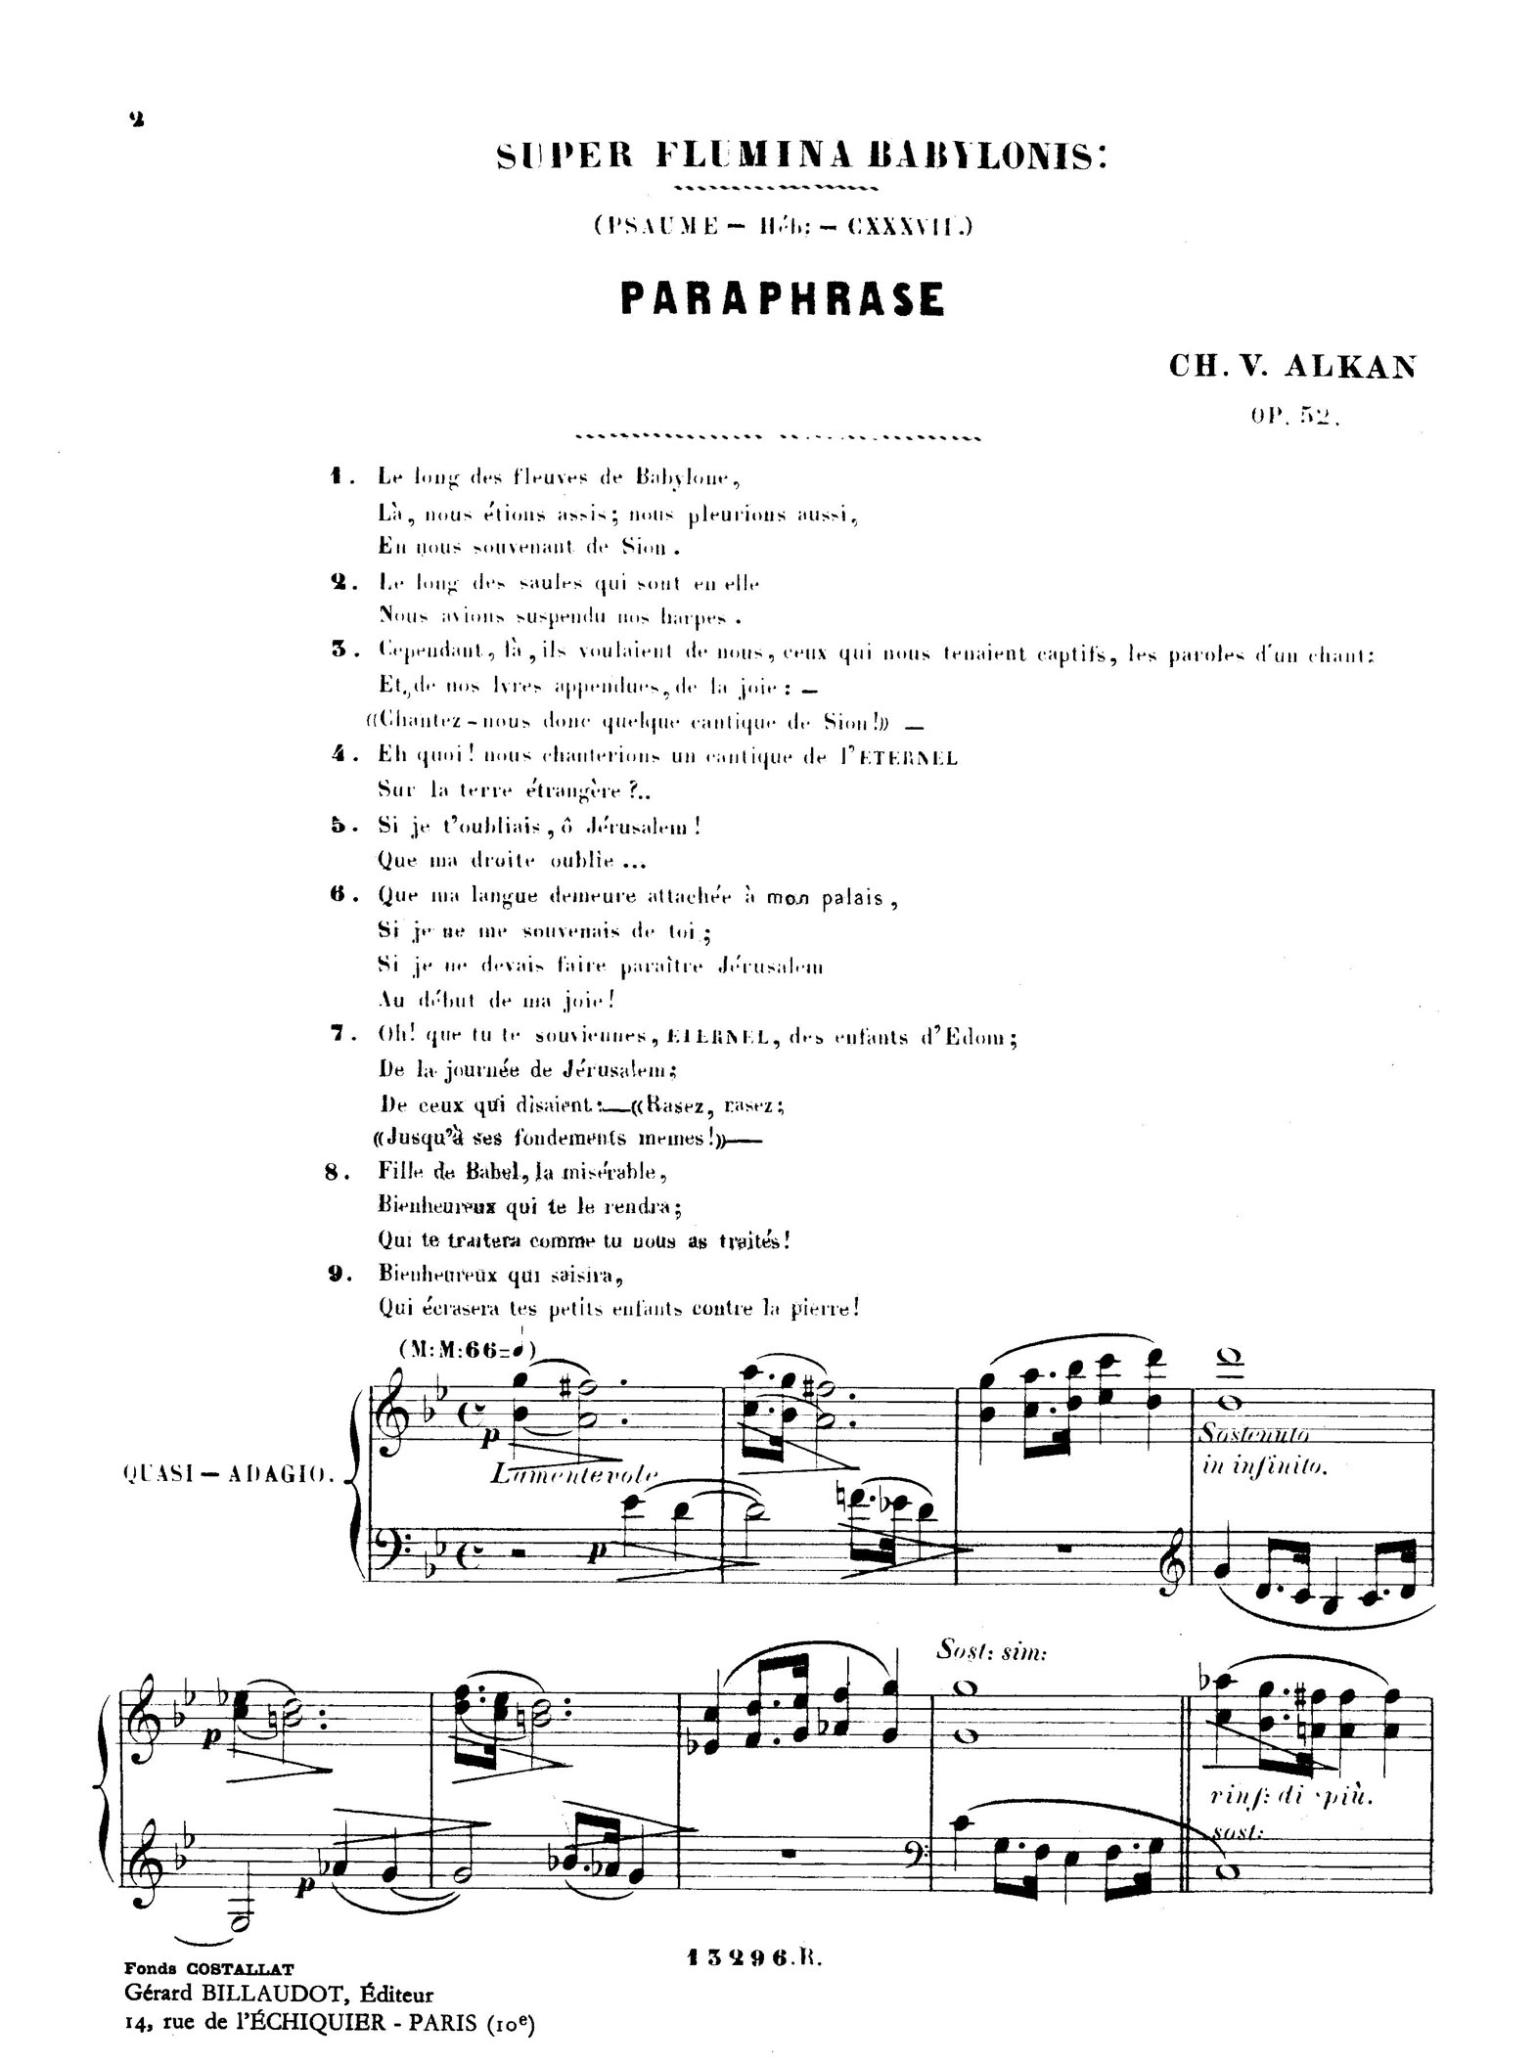 Sheet music featuring French text above staff.